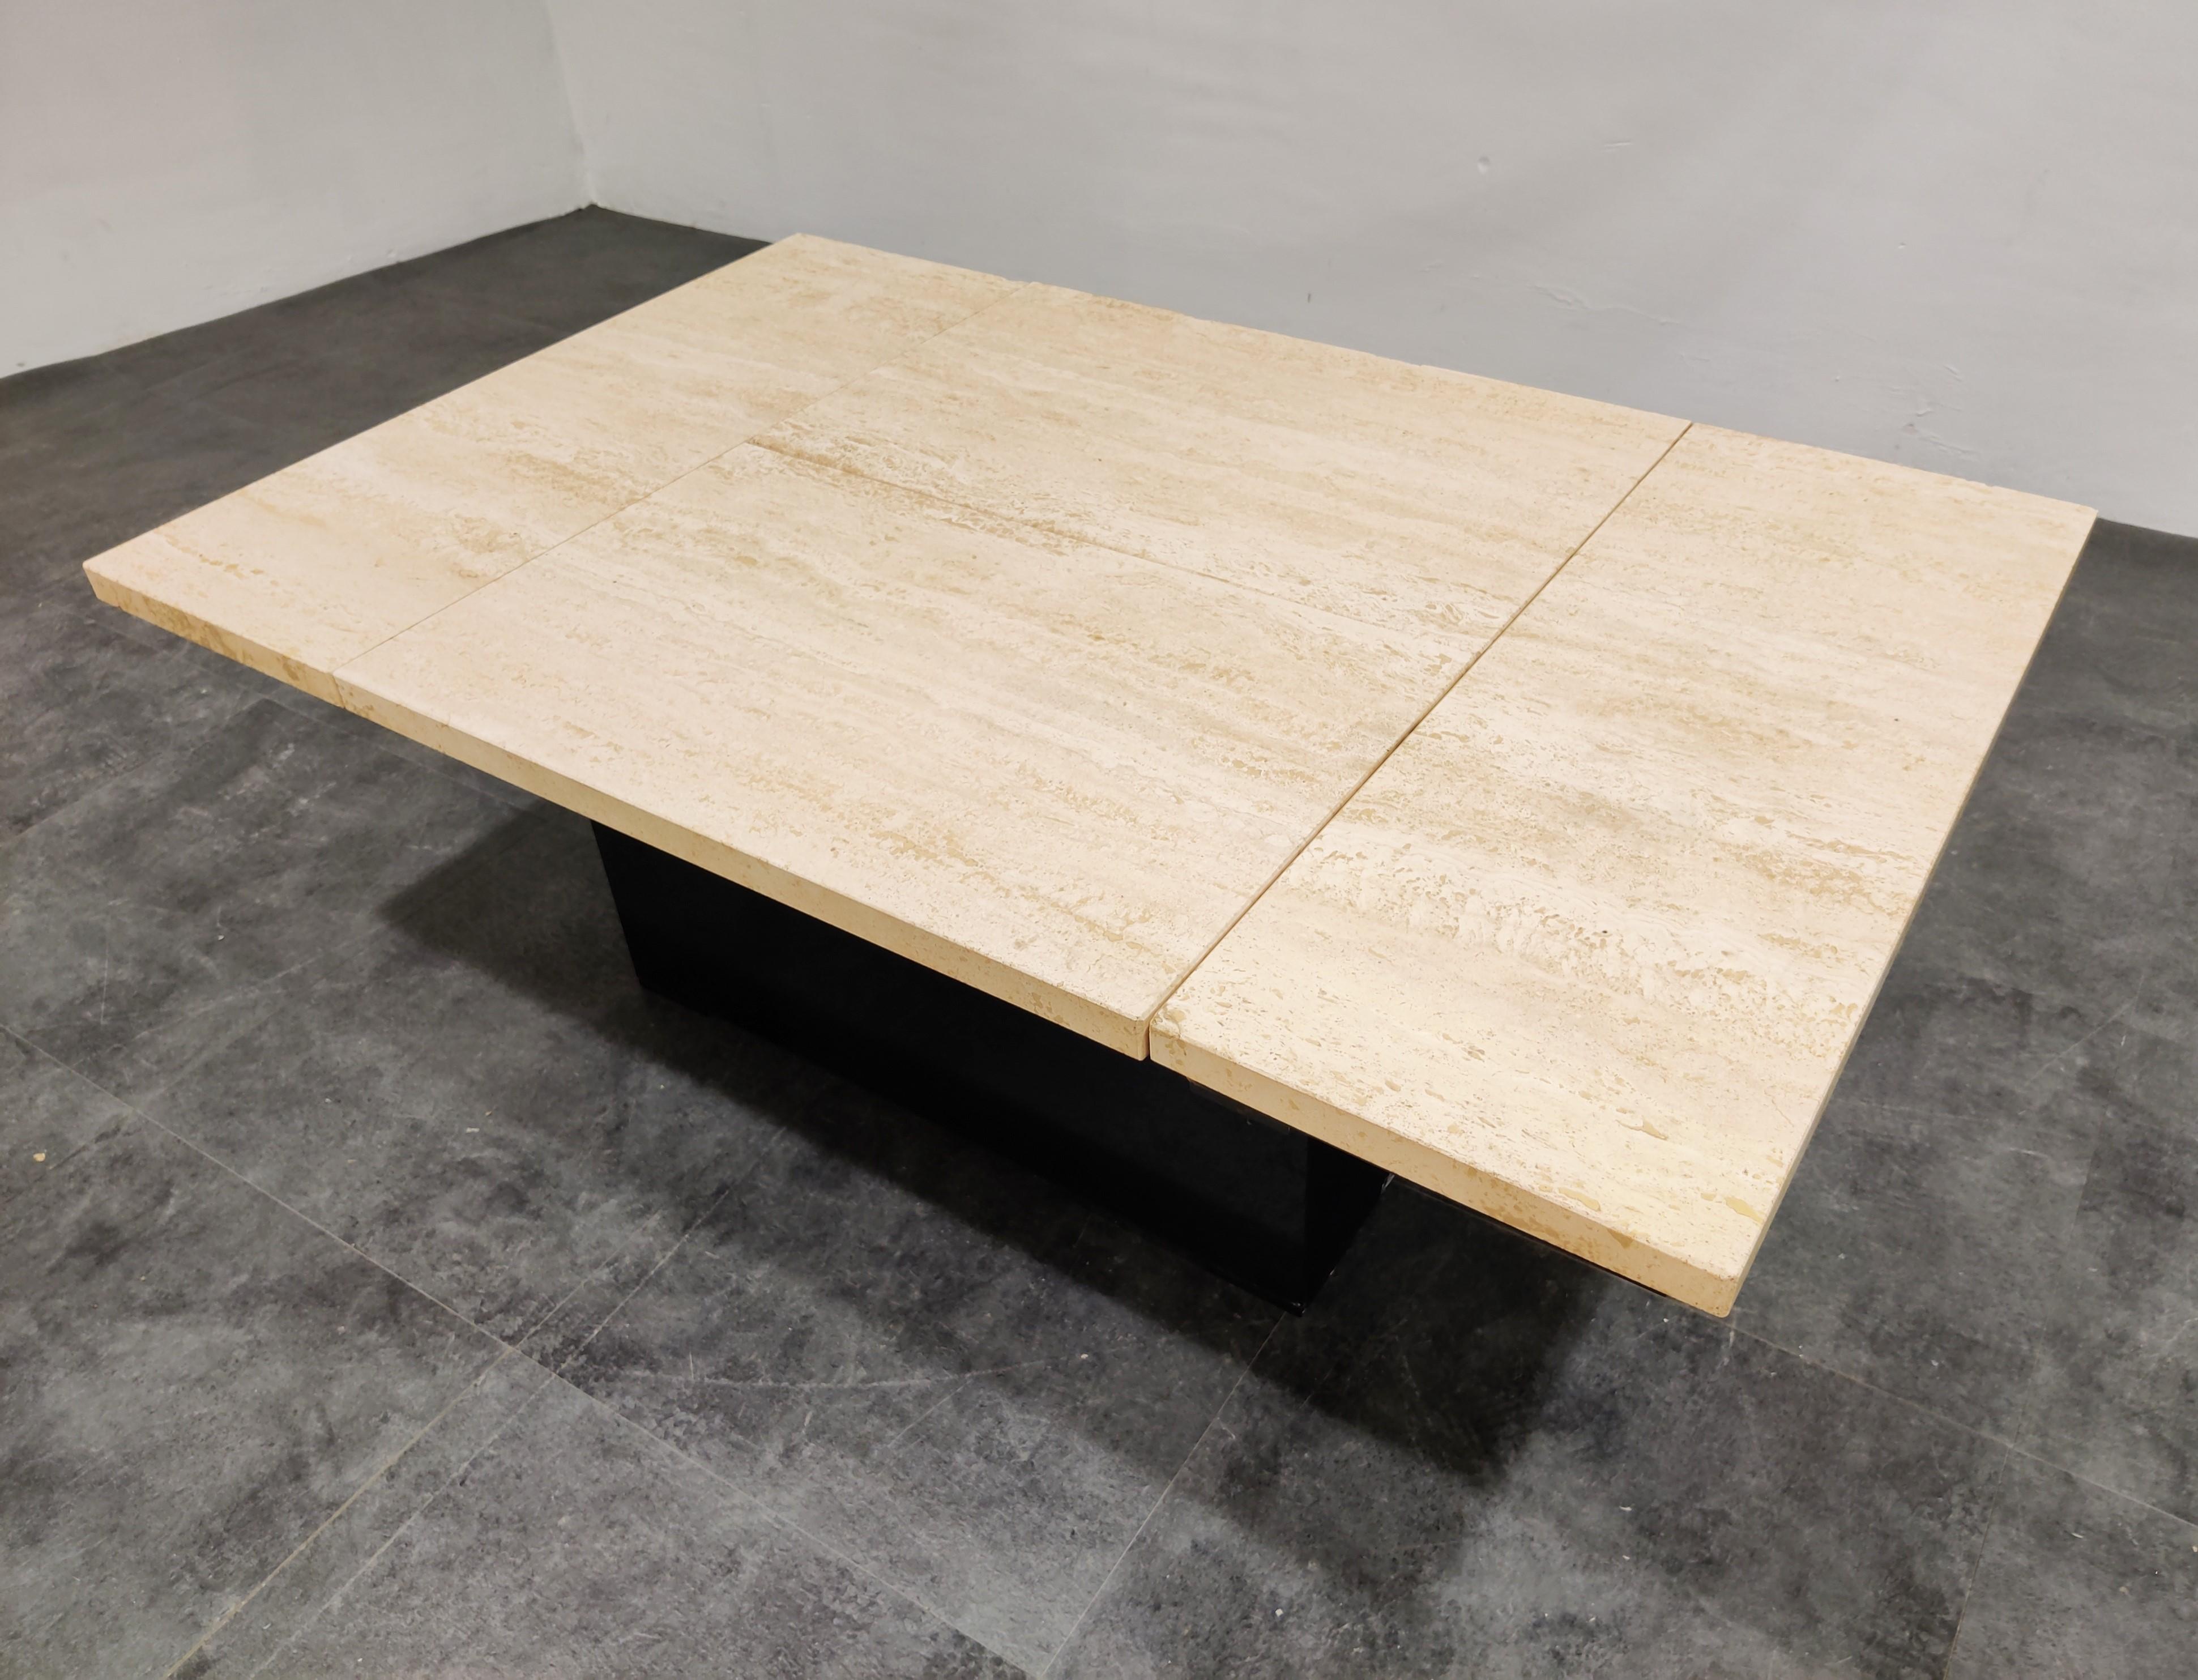 Vintage travertine hidden bar coffee table.

With the top closed it looks like a regular coffee table, but open it up and it reveals a mirrored storage space for glasses and bottles.

A great coffee table to add some 1970s glamour period